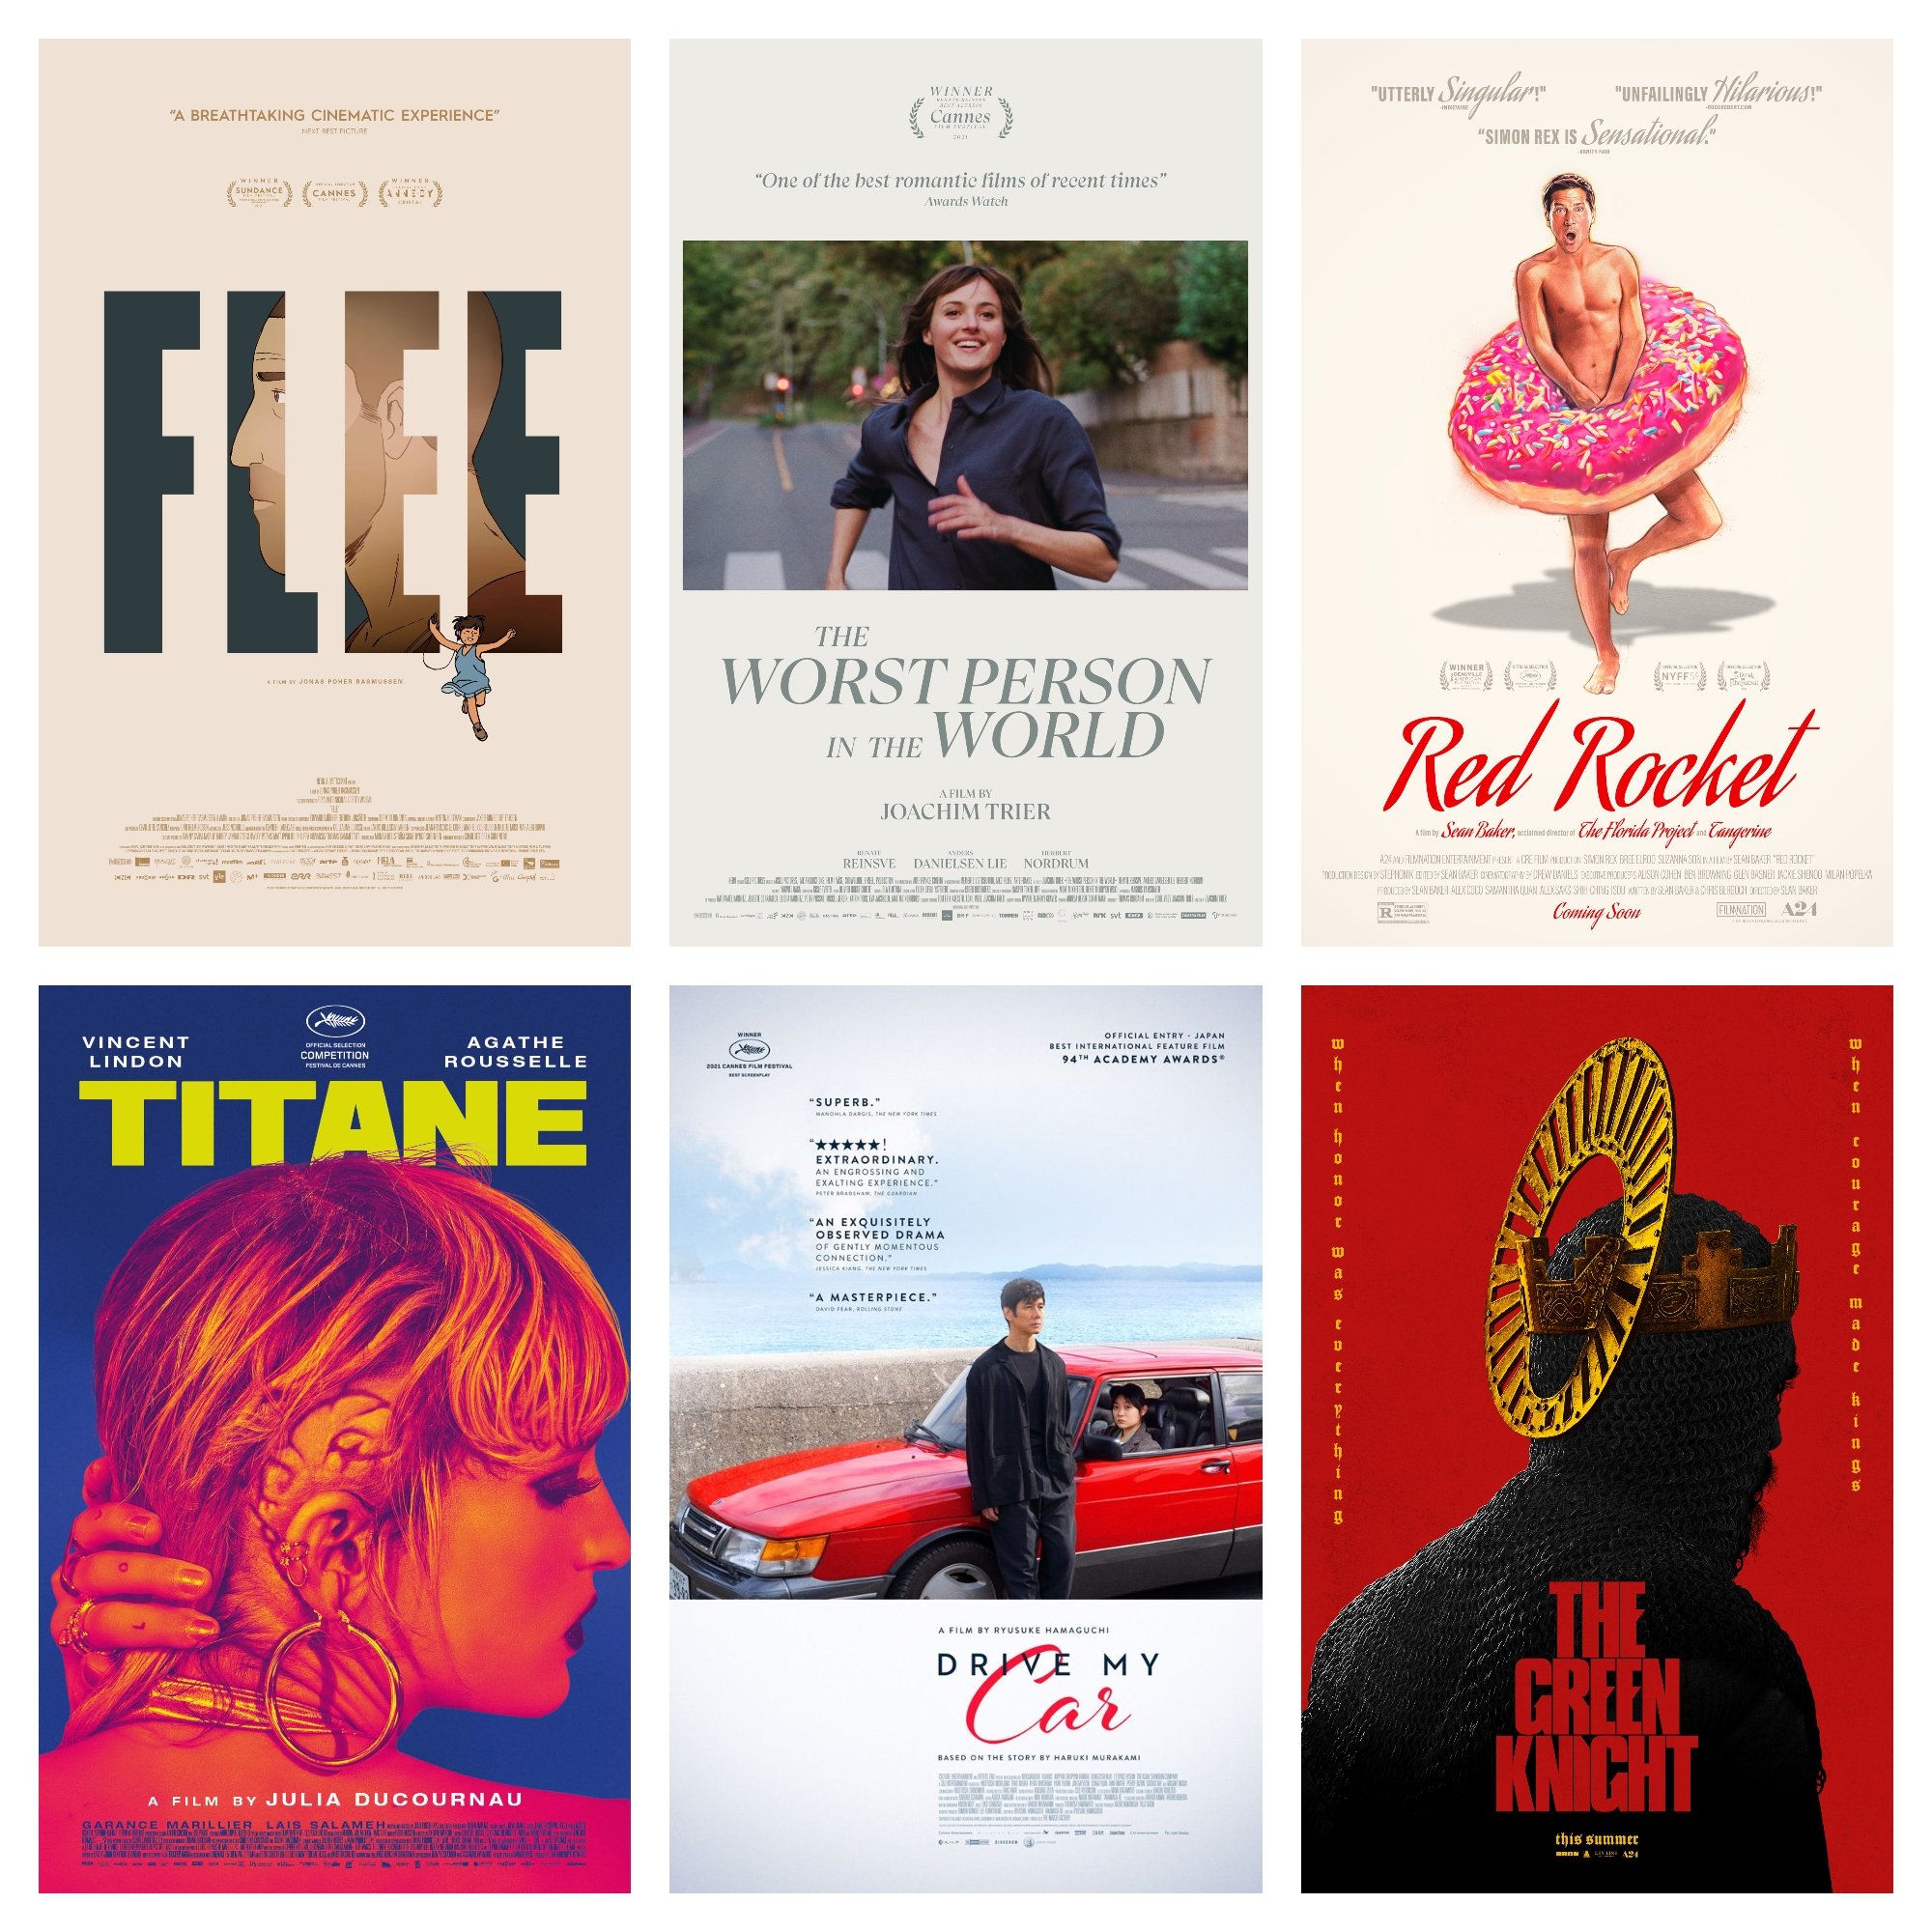 Top Films of 2021 'Flee,' 'The Worst Person in the World,' 'Red Rocket,' 'Titane,' 'Drive My Car,' 'The Green Knight' in collage